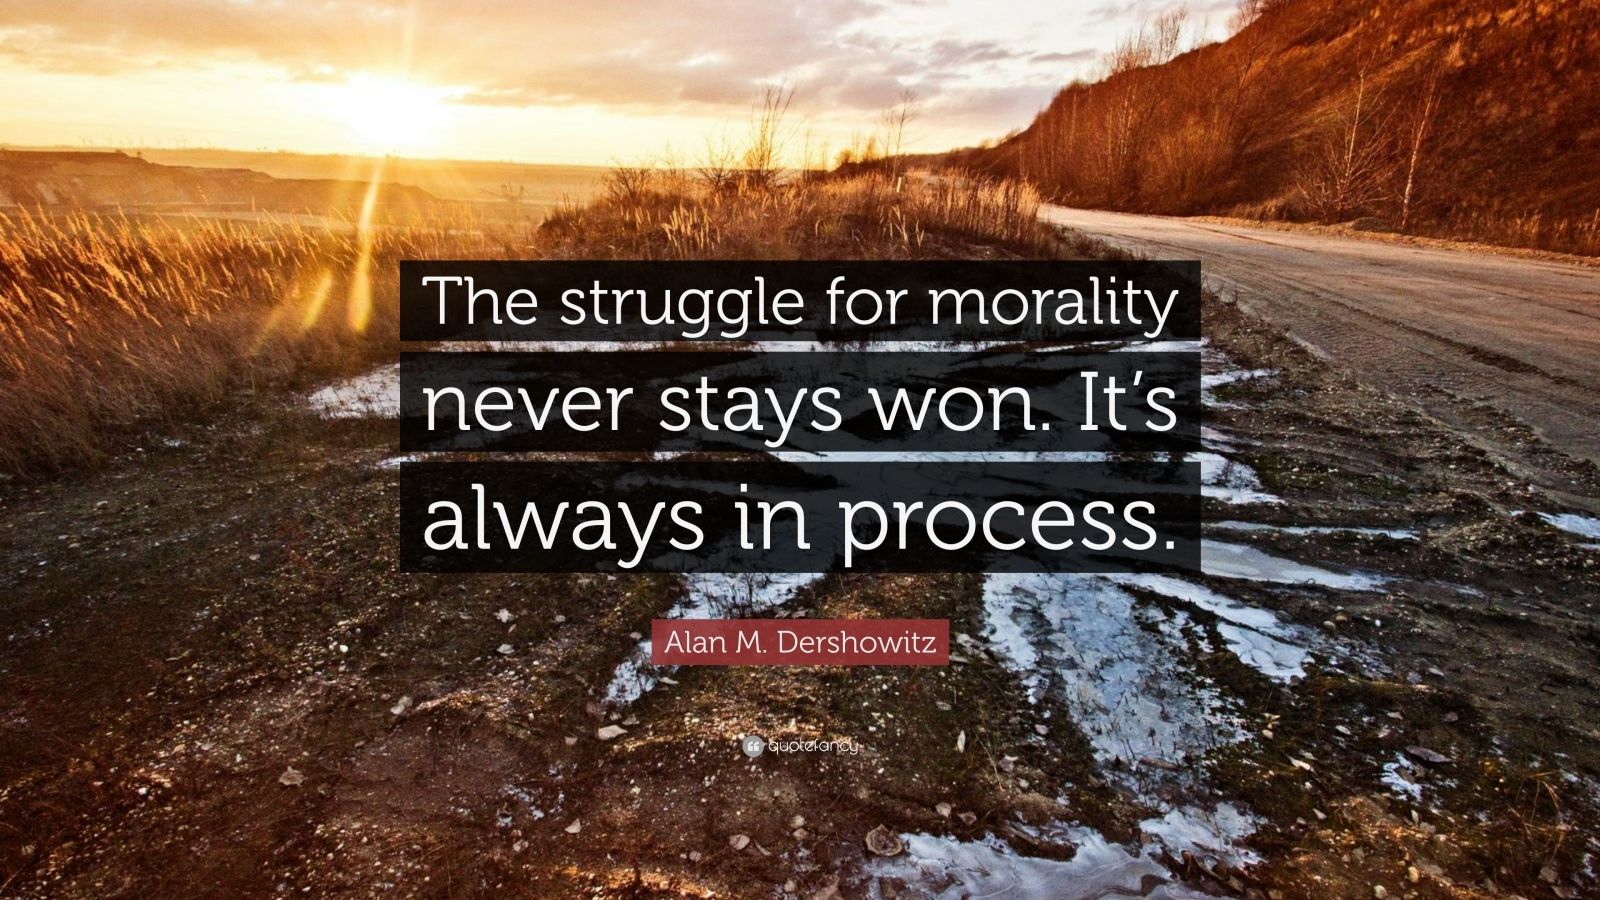 Alan M. Dershowitz Quote: “The struggle for morality never stays won ...